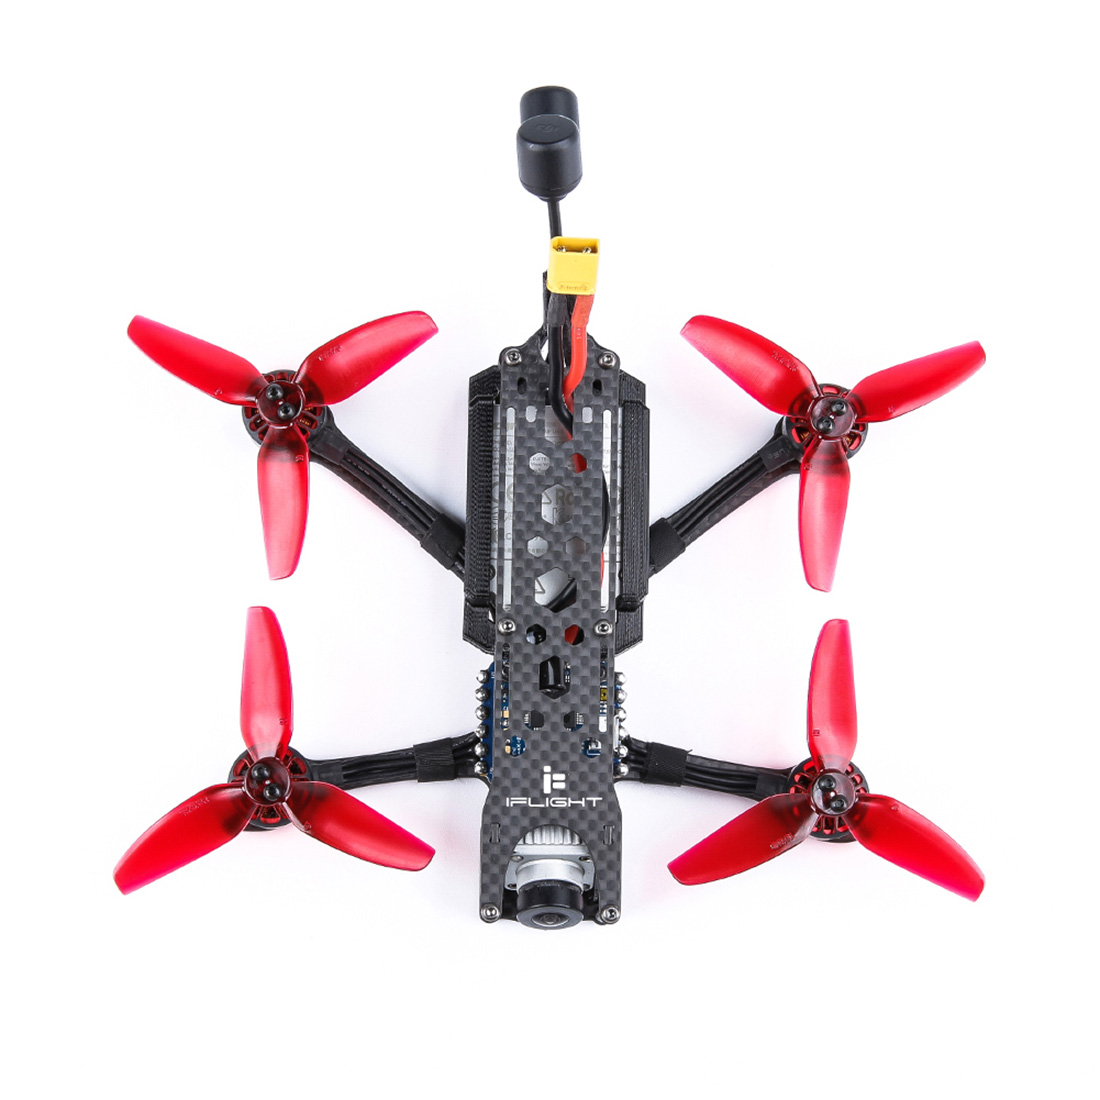 iFlight DC3 3inch 144mm HD FPV Freestyle Quadcopter Racing